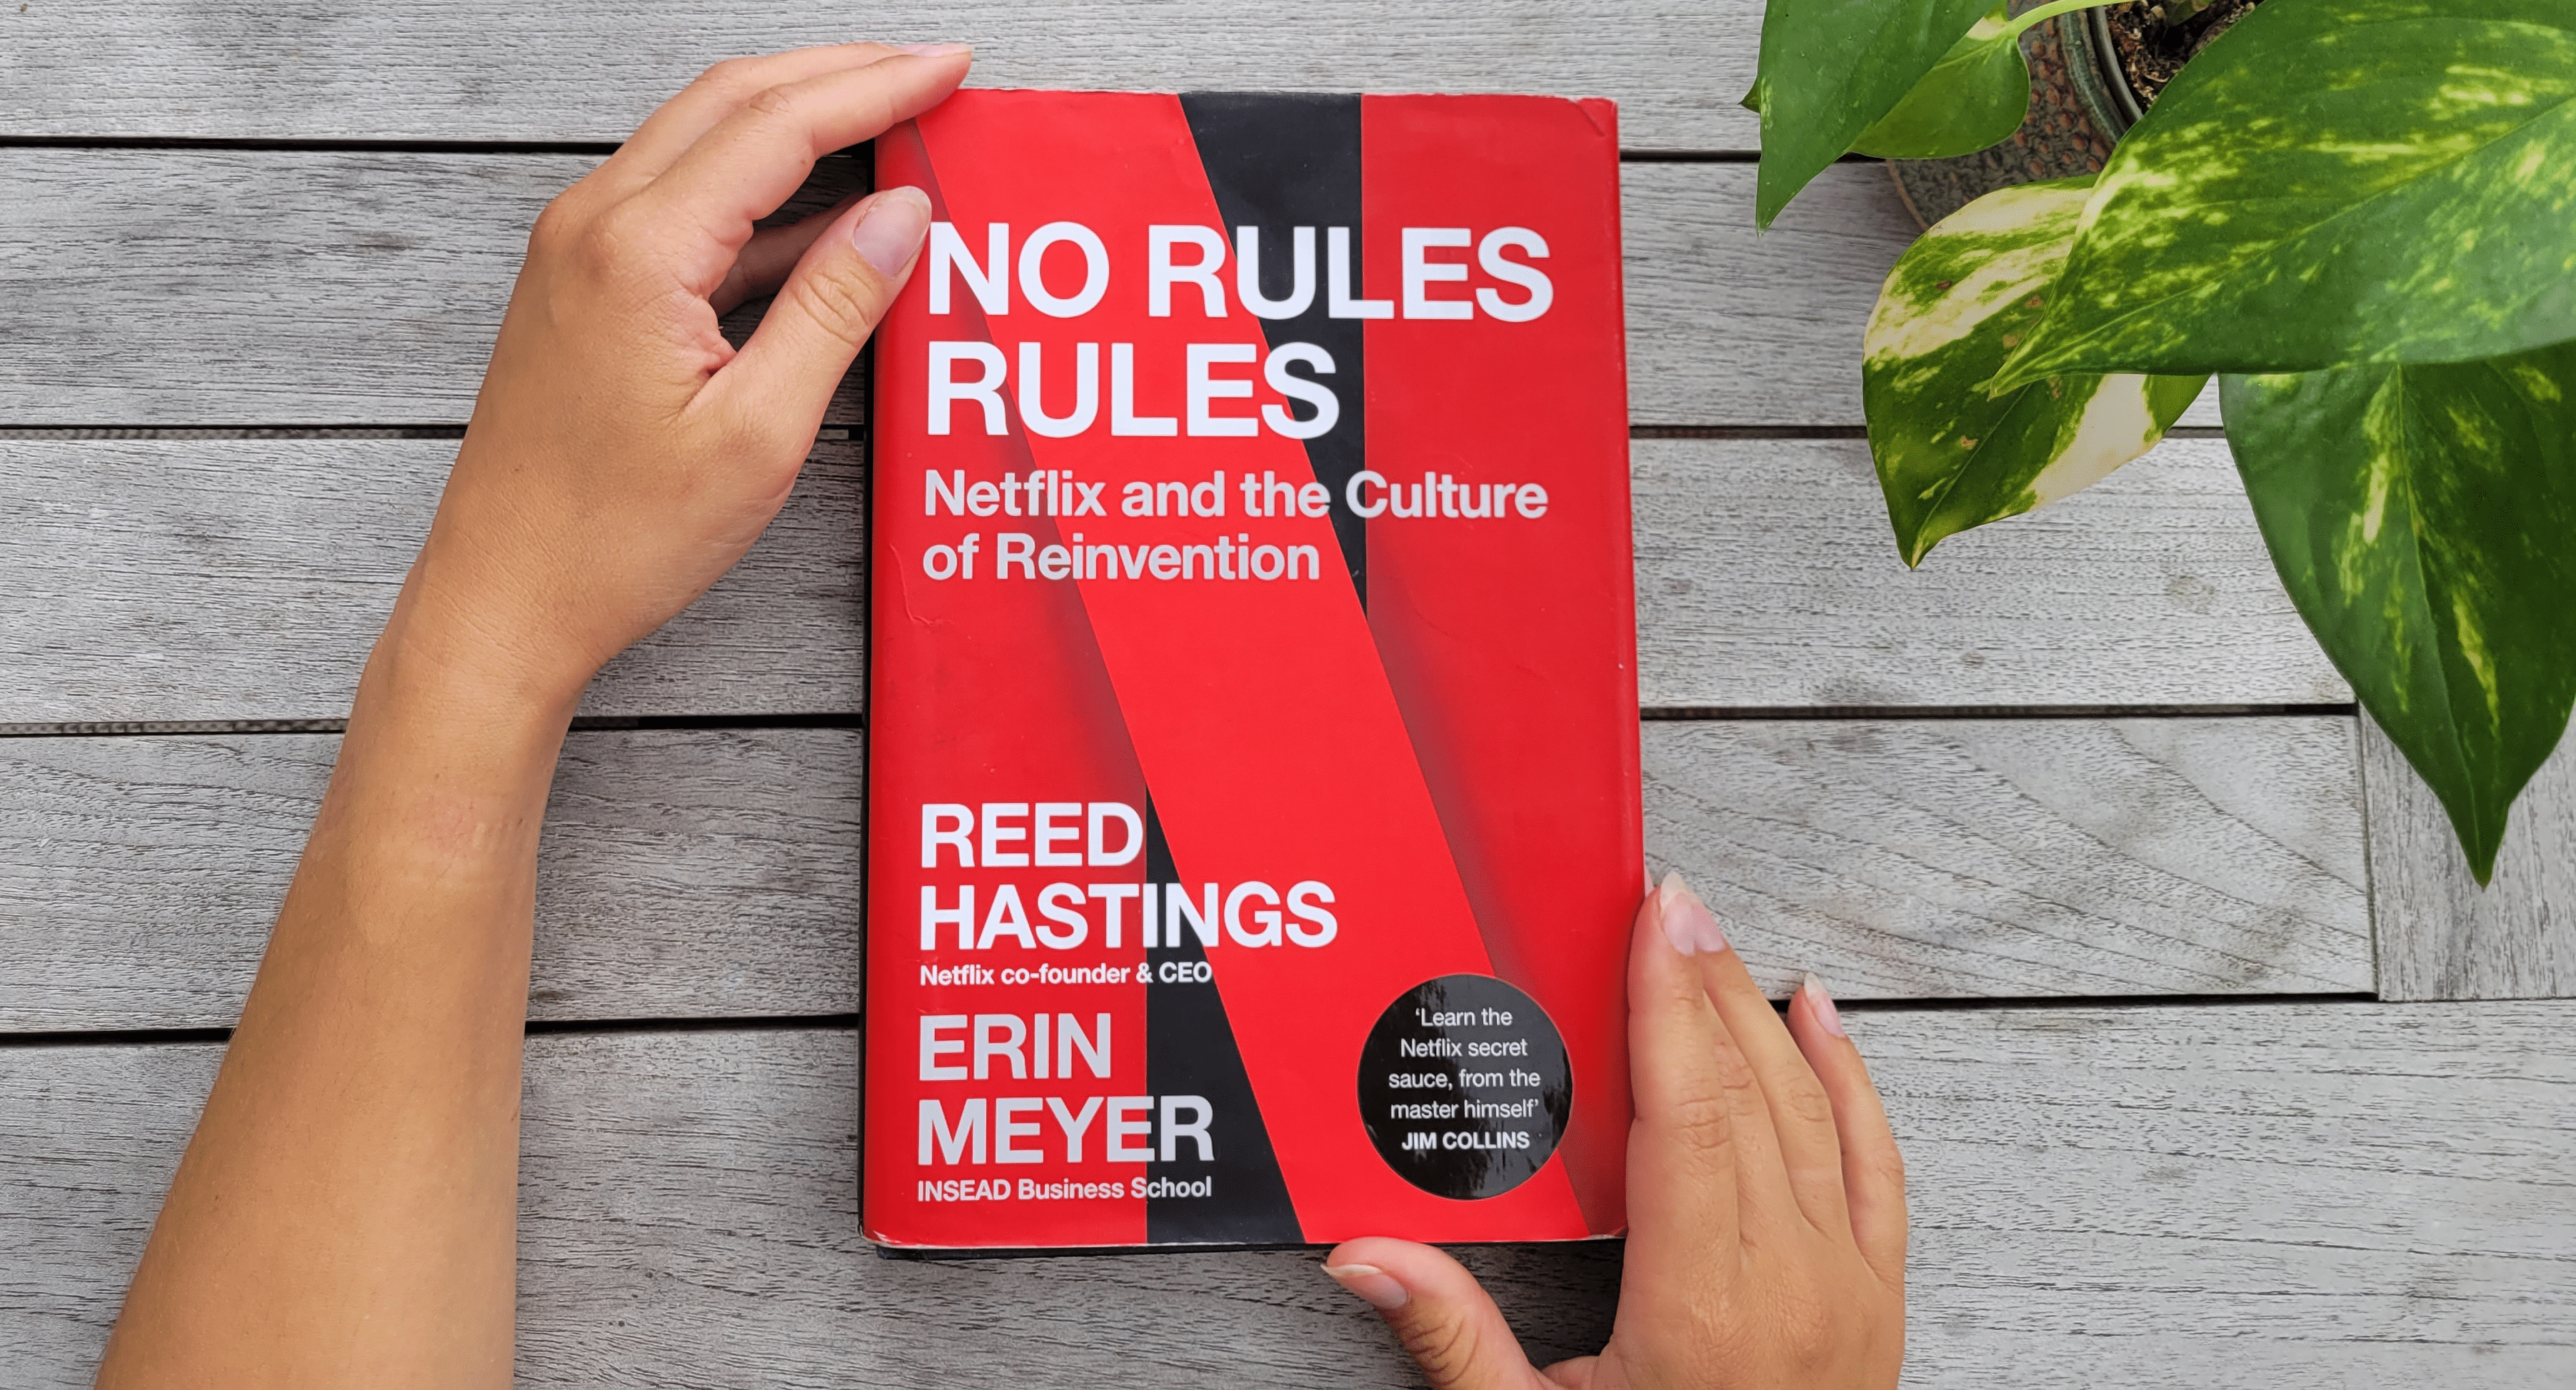 Summary – No Rules Rules: Netflix and the Culture of Reinvention by Erin Meyer and Reed Hastings